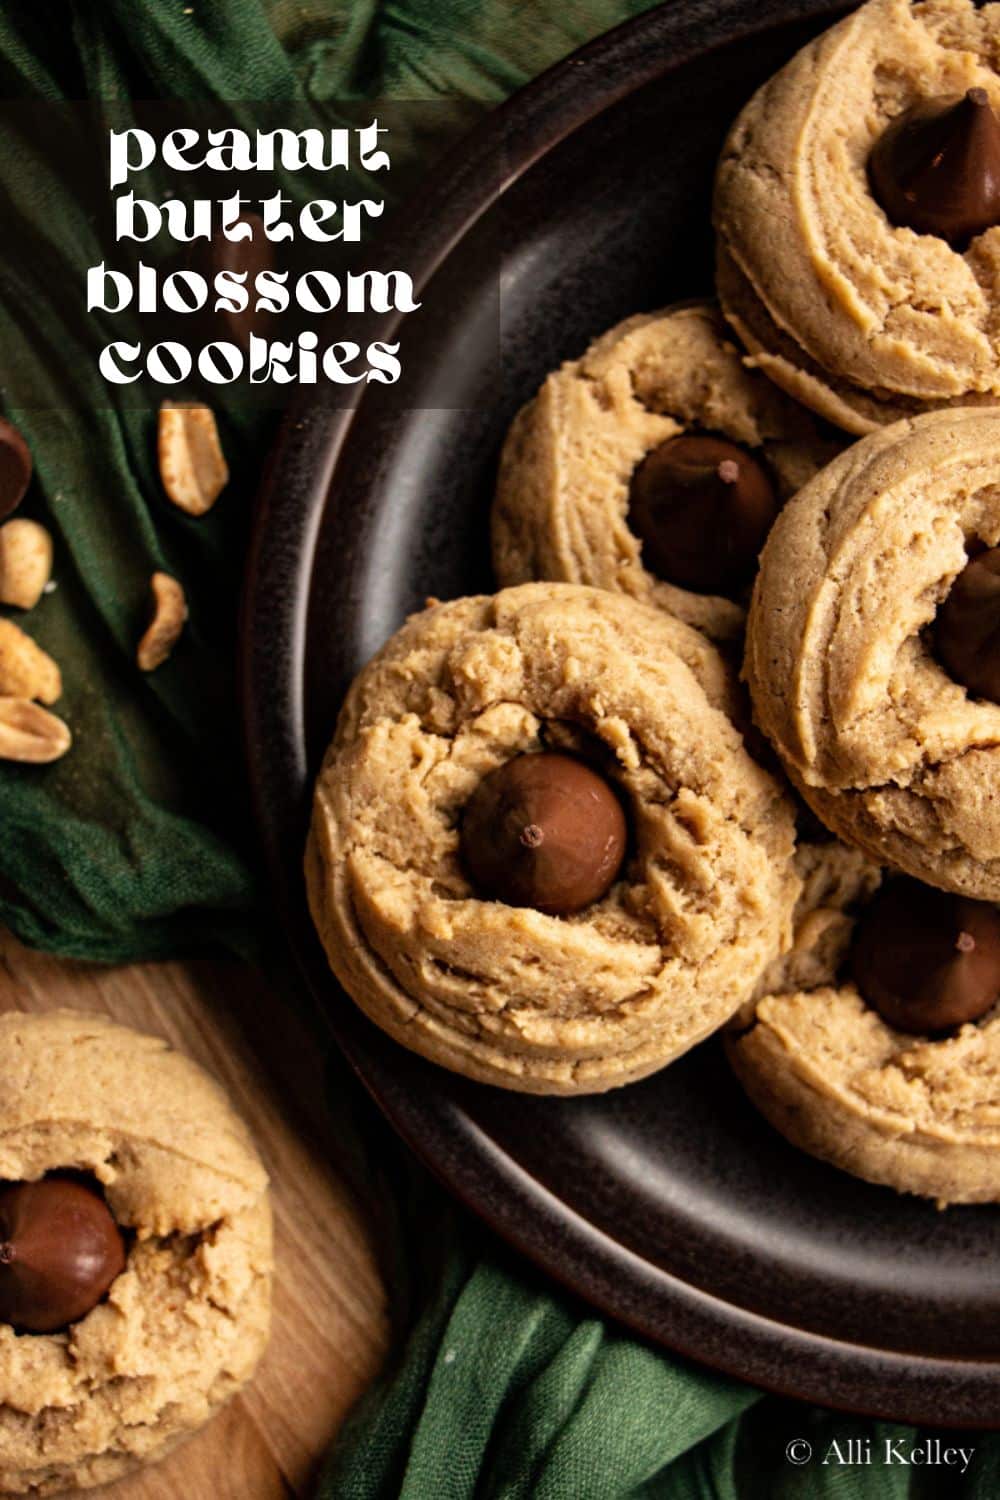 These soft peanut butter cookies are easy to make, soft, and delicious!! Every bite packed with peanut butter flavor, topped with chocolate chips to make them extra special. #baking #bakingcookies #cookies #peanutbutter #peanutbuttercookies #chocolateandpeanutbutter #chocolatepeanut #easycookies #easyrecipe #easypeanutbuttercookies #softcookies #softpeanutbuttercookies